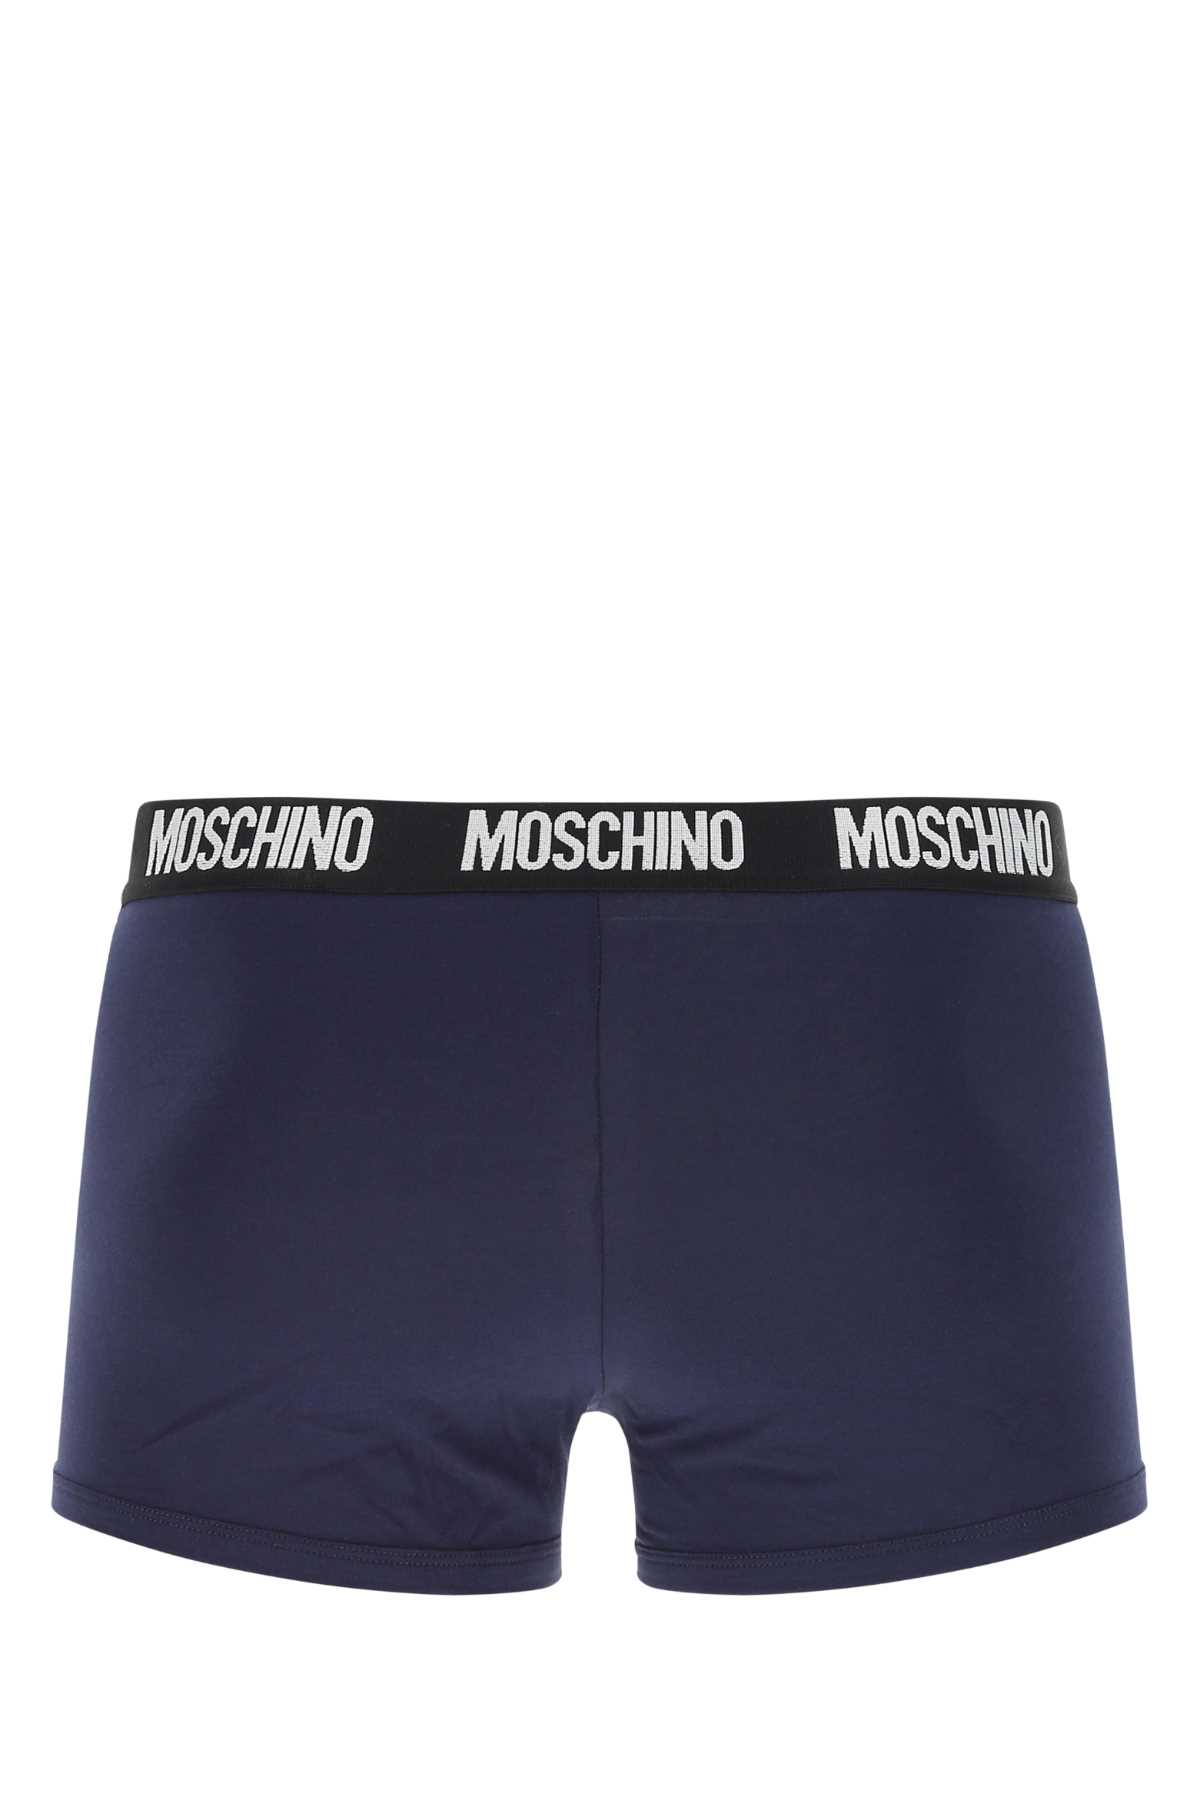 Moschino Blue Stretch Cotton Boxer In 0290